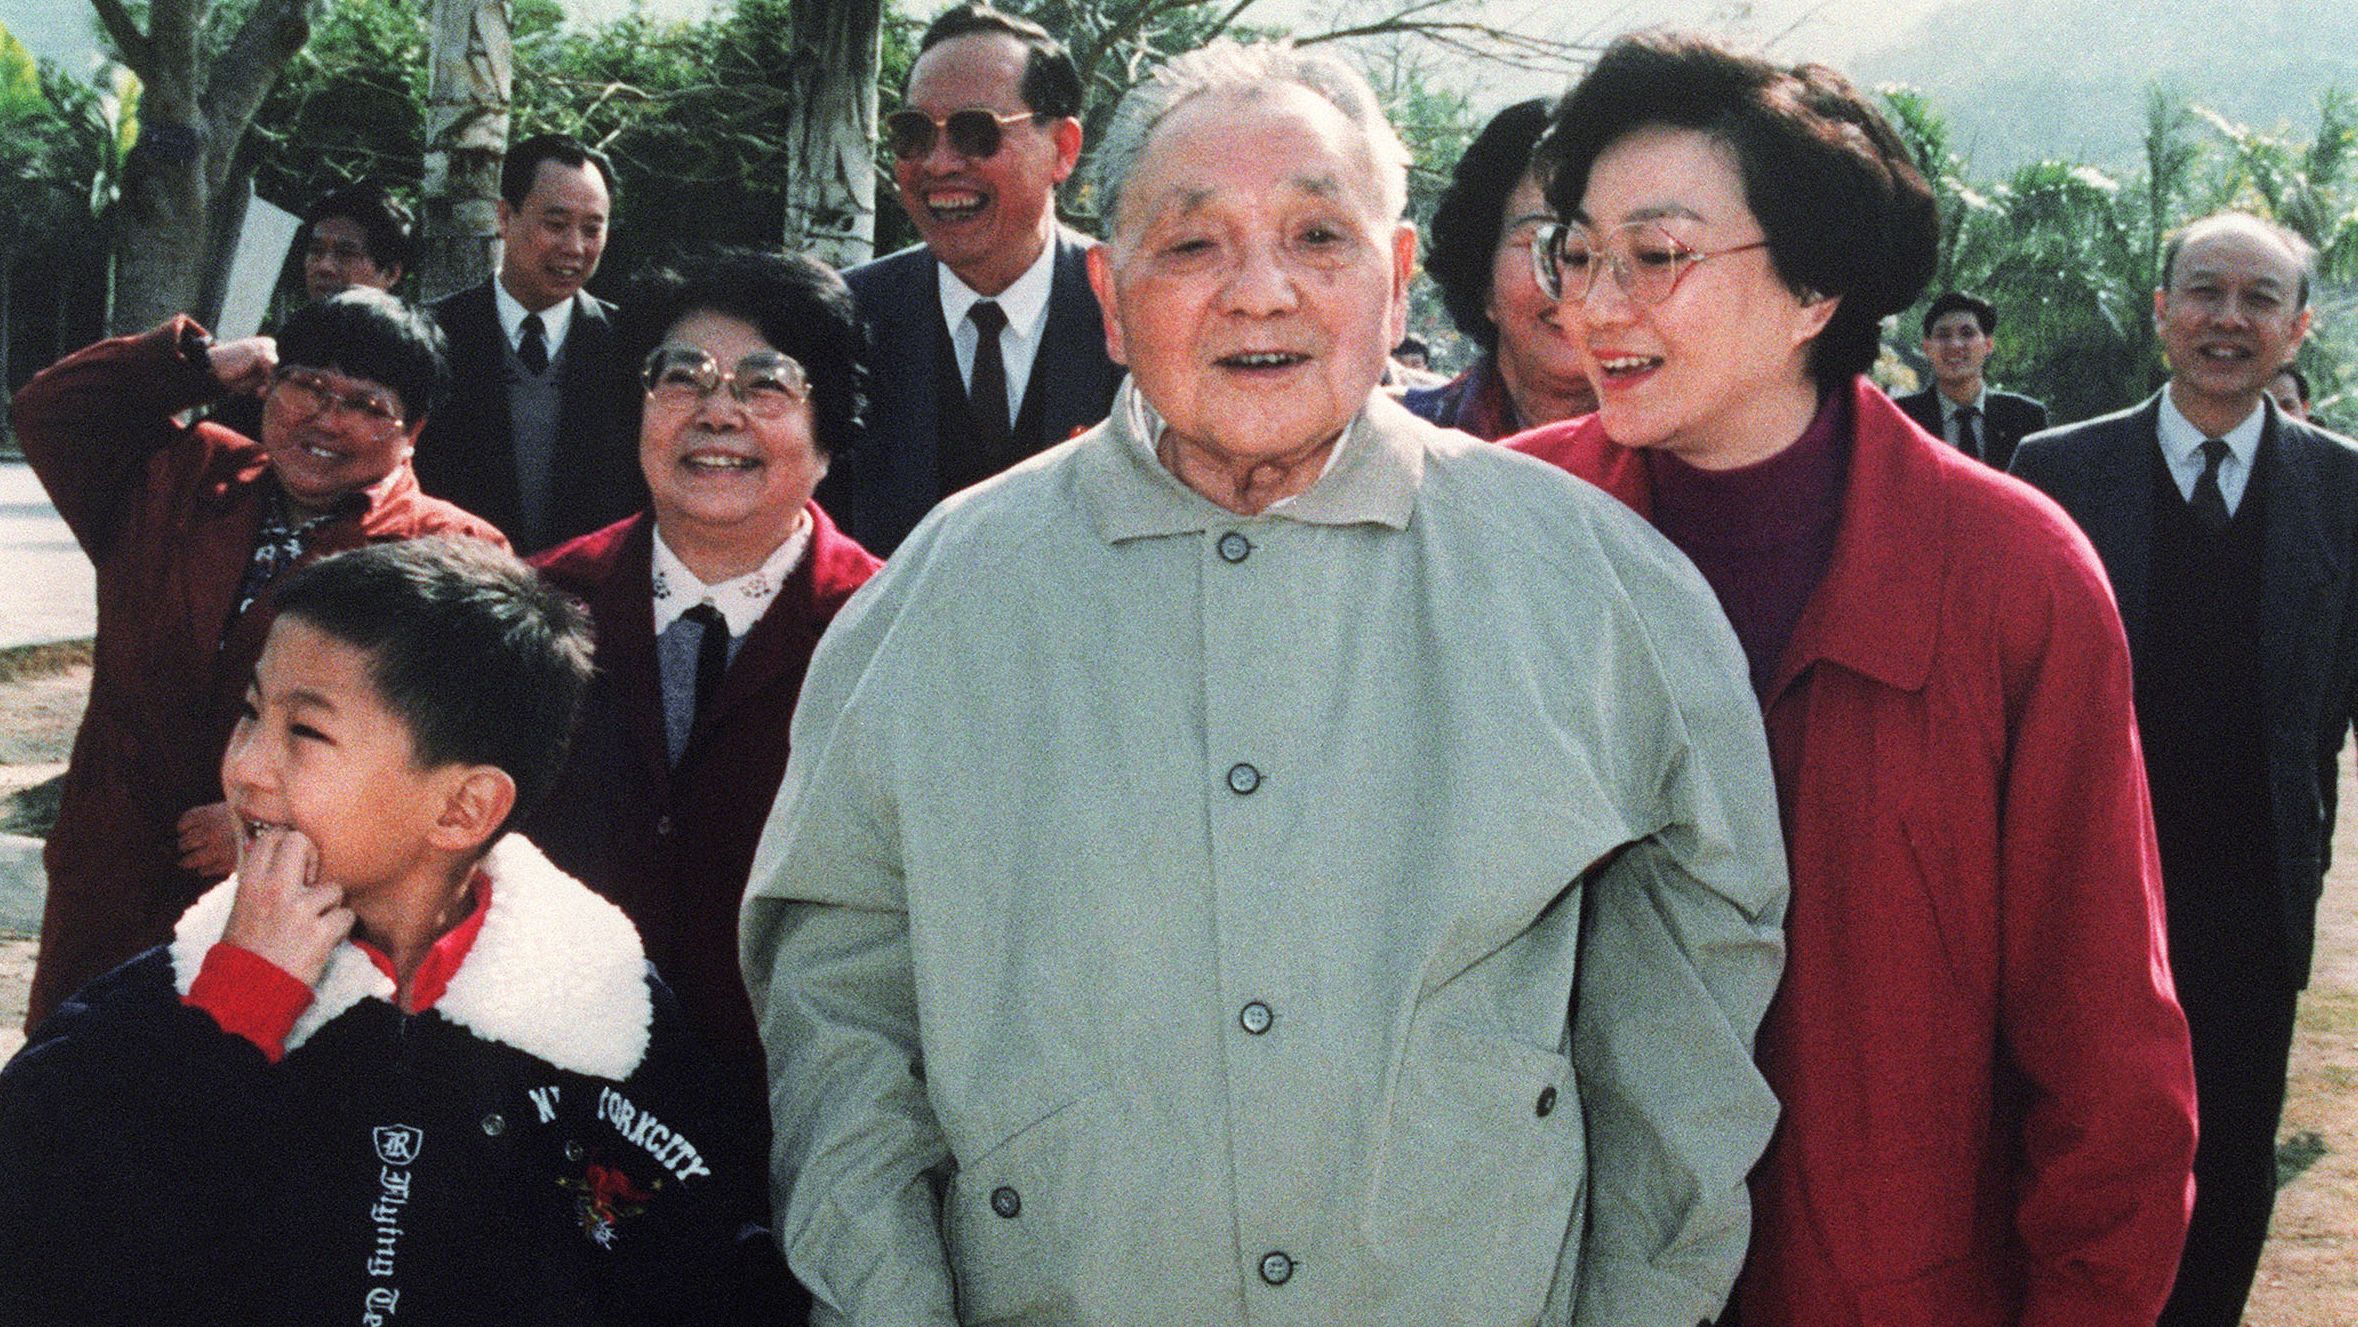 Deng is joined by members of his family as he visits Shenzhen, China, in January 1992. Deng toured several southern cities around that time, and his speeches during the tour are often credited for spurring economic reform in the country.